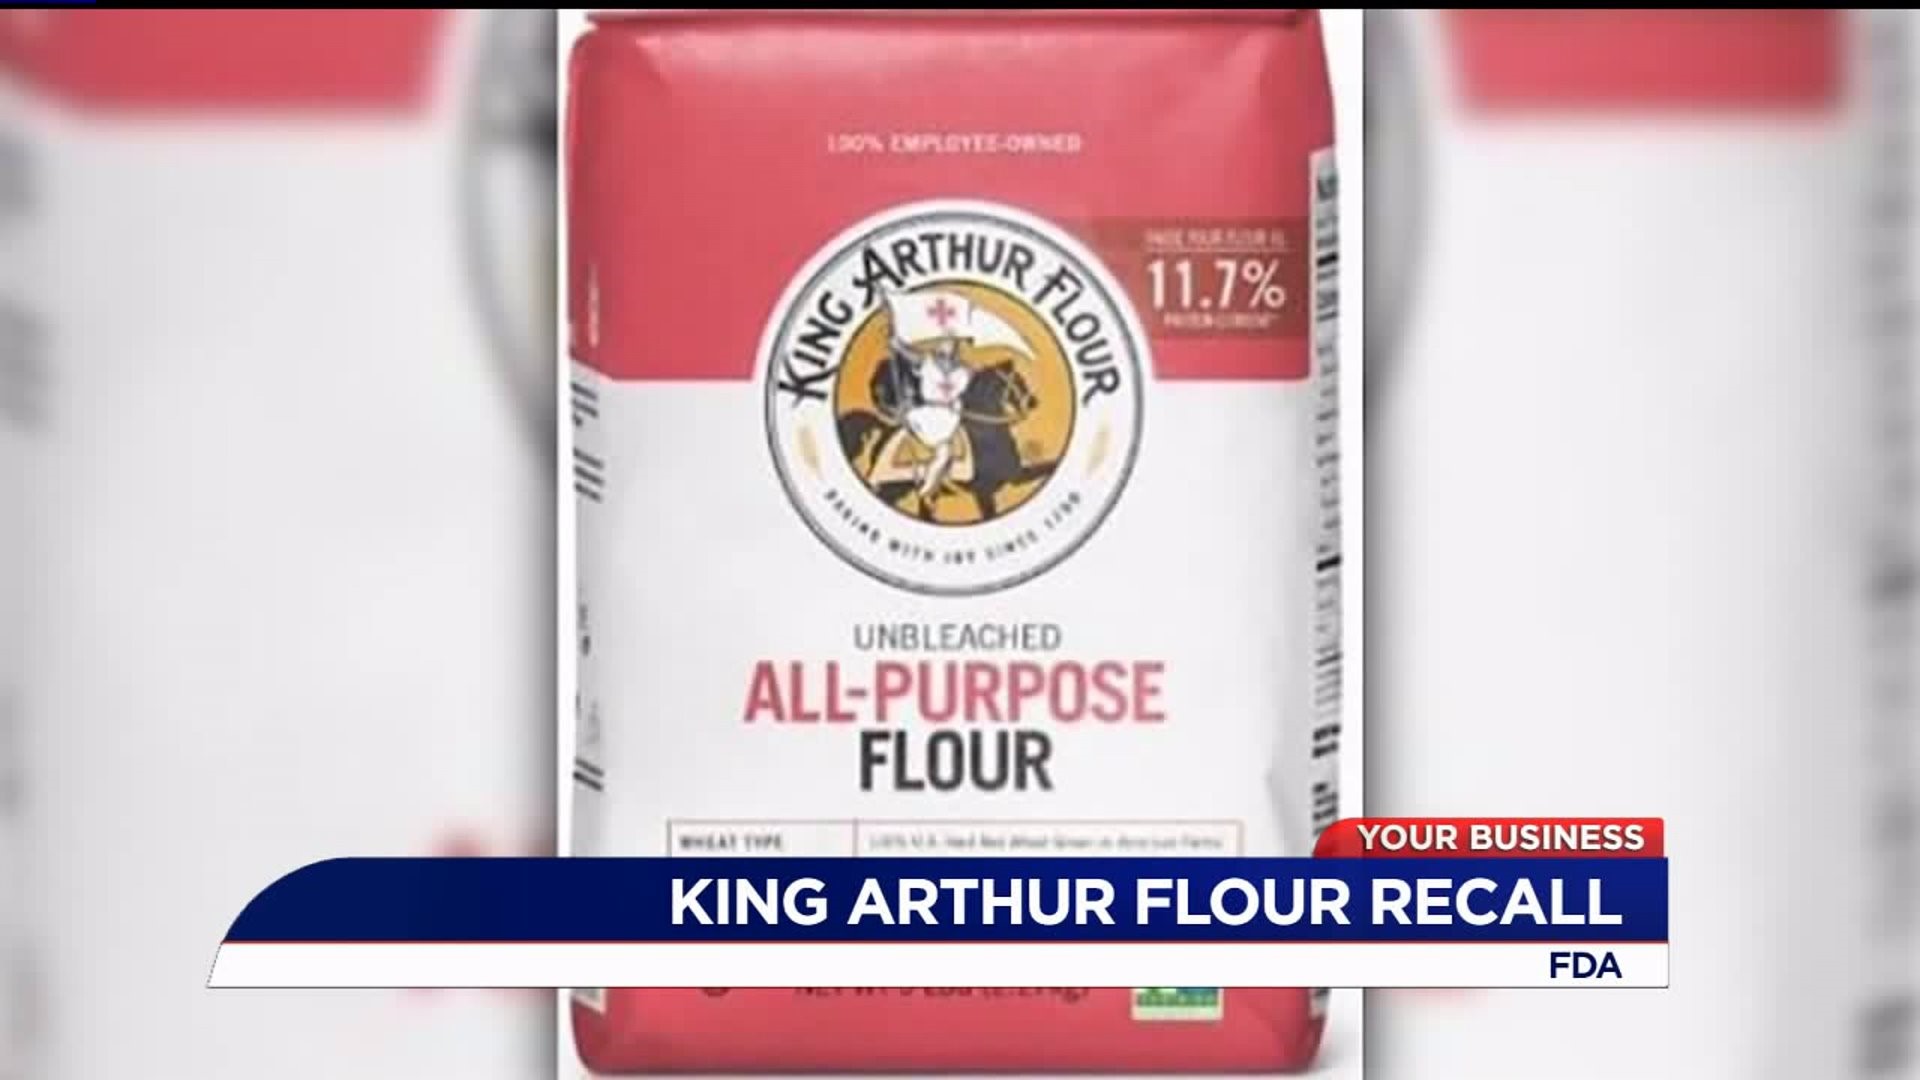 Why this flour is being recalled